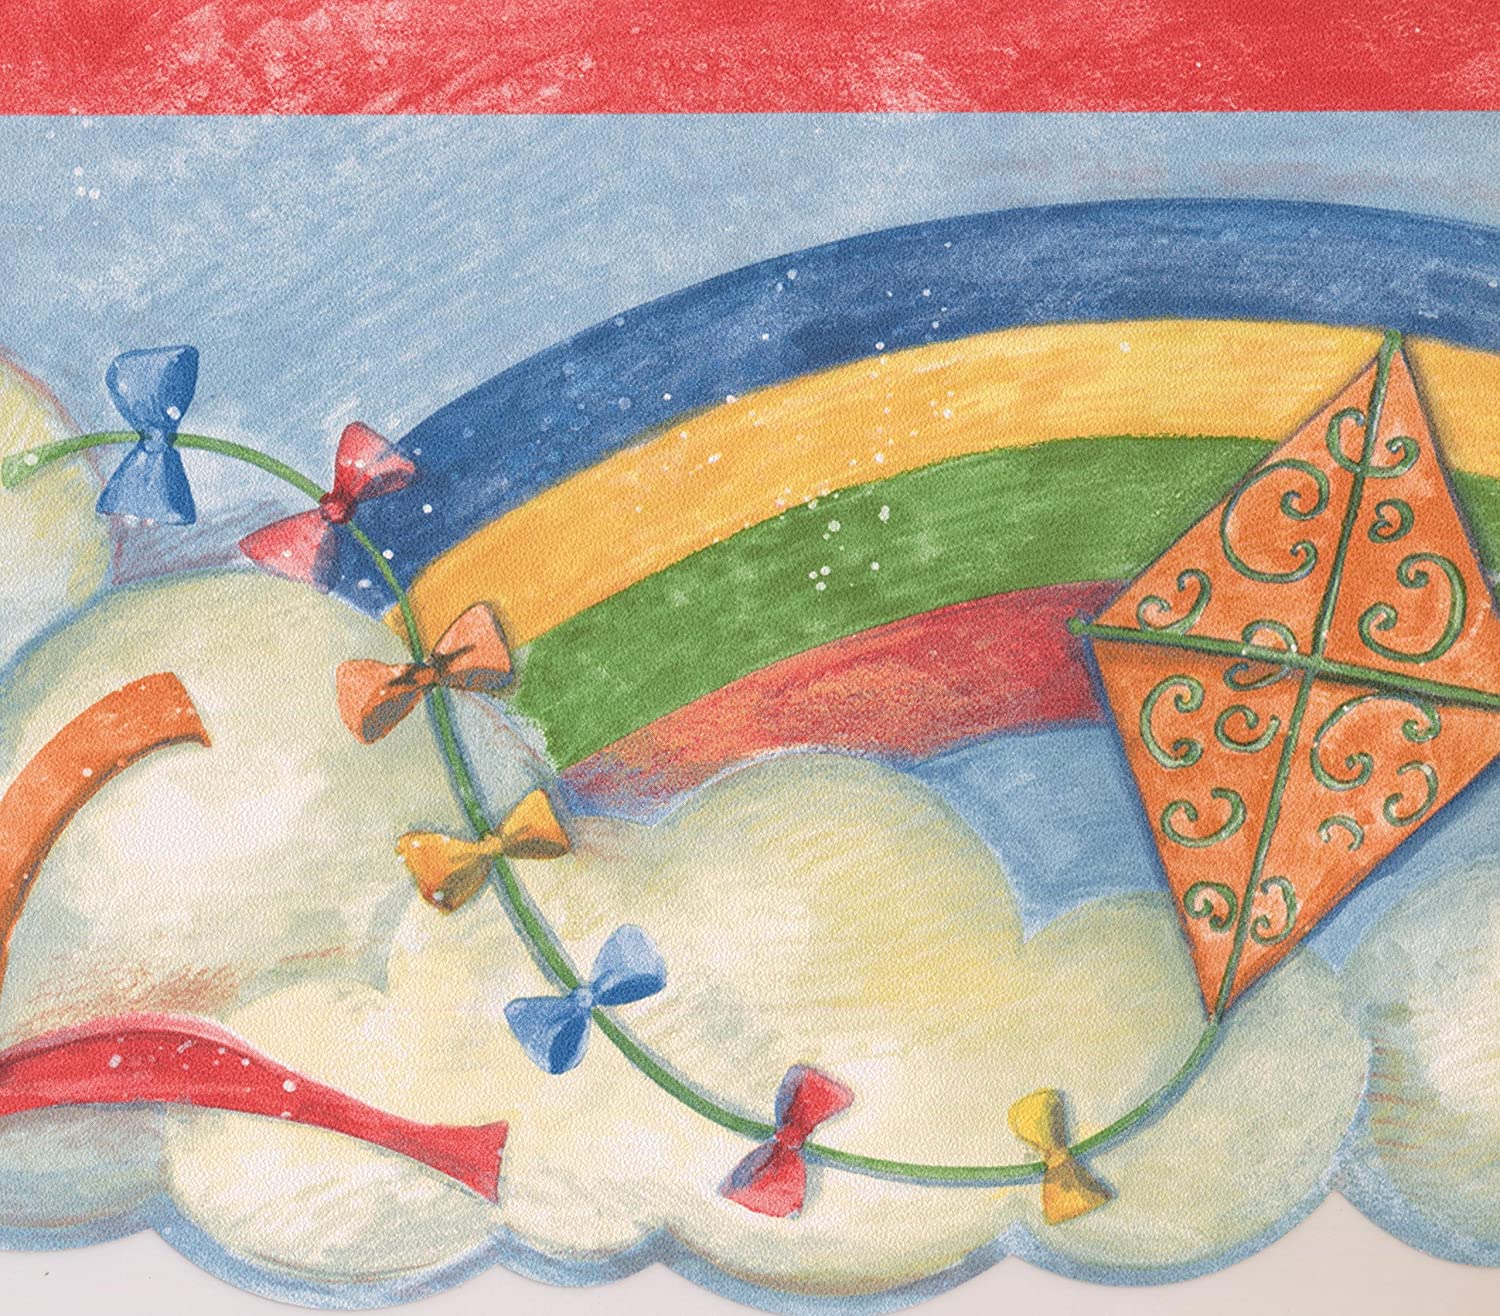 Rainbow Colorful Kites in The Clouds Retro Wallpaper Border for Kids, Roll 15' x 7'': Amazon.ca: Tools & Home Improvement